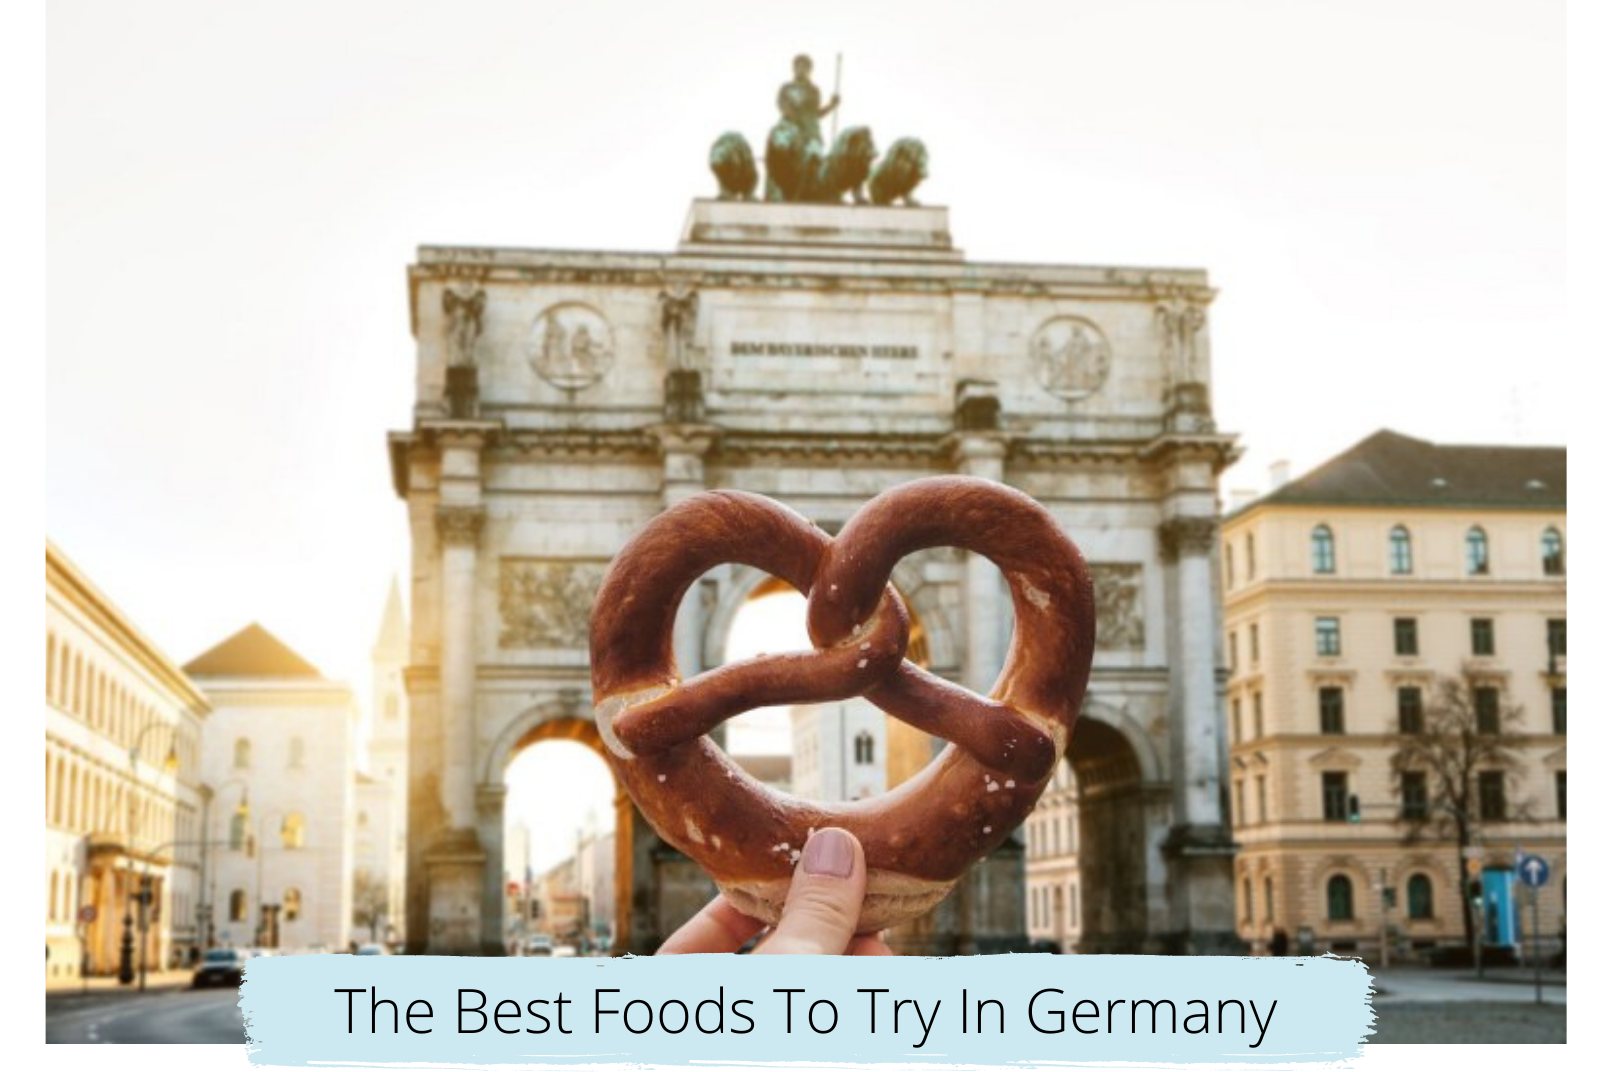 Lucy on Locale's Germany travel guide